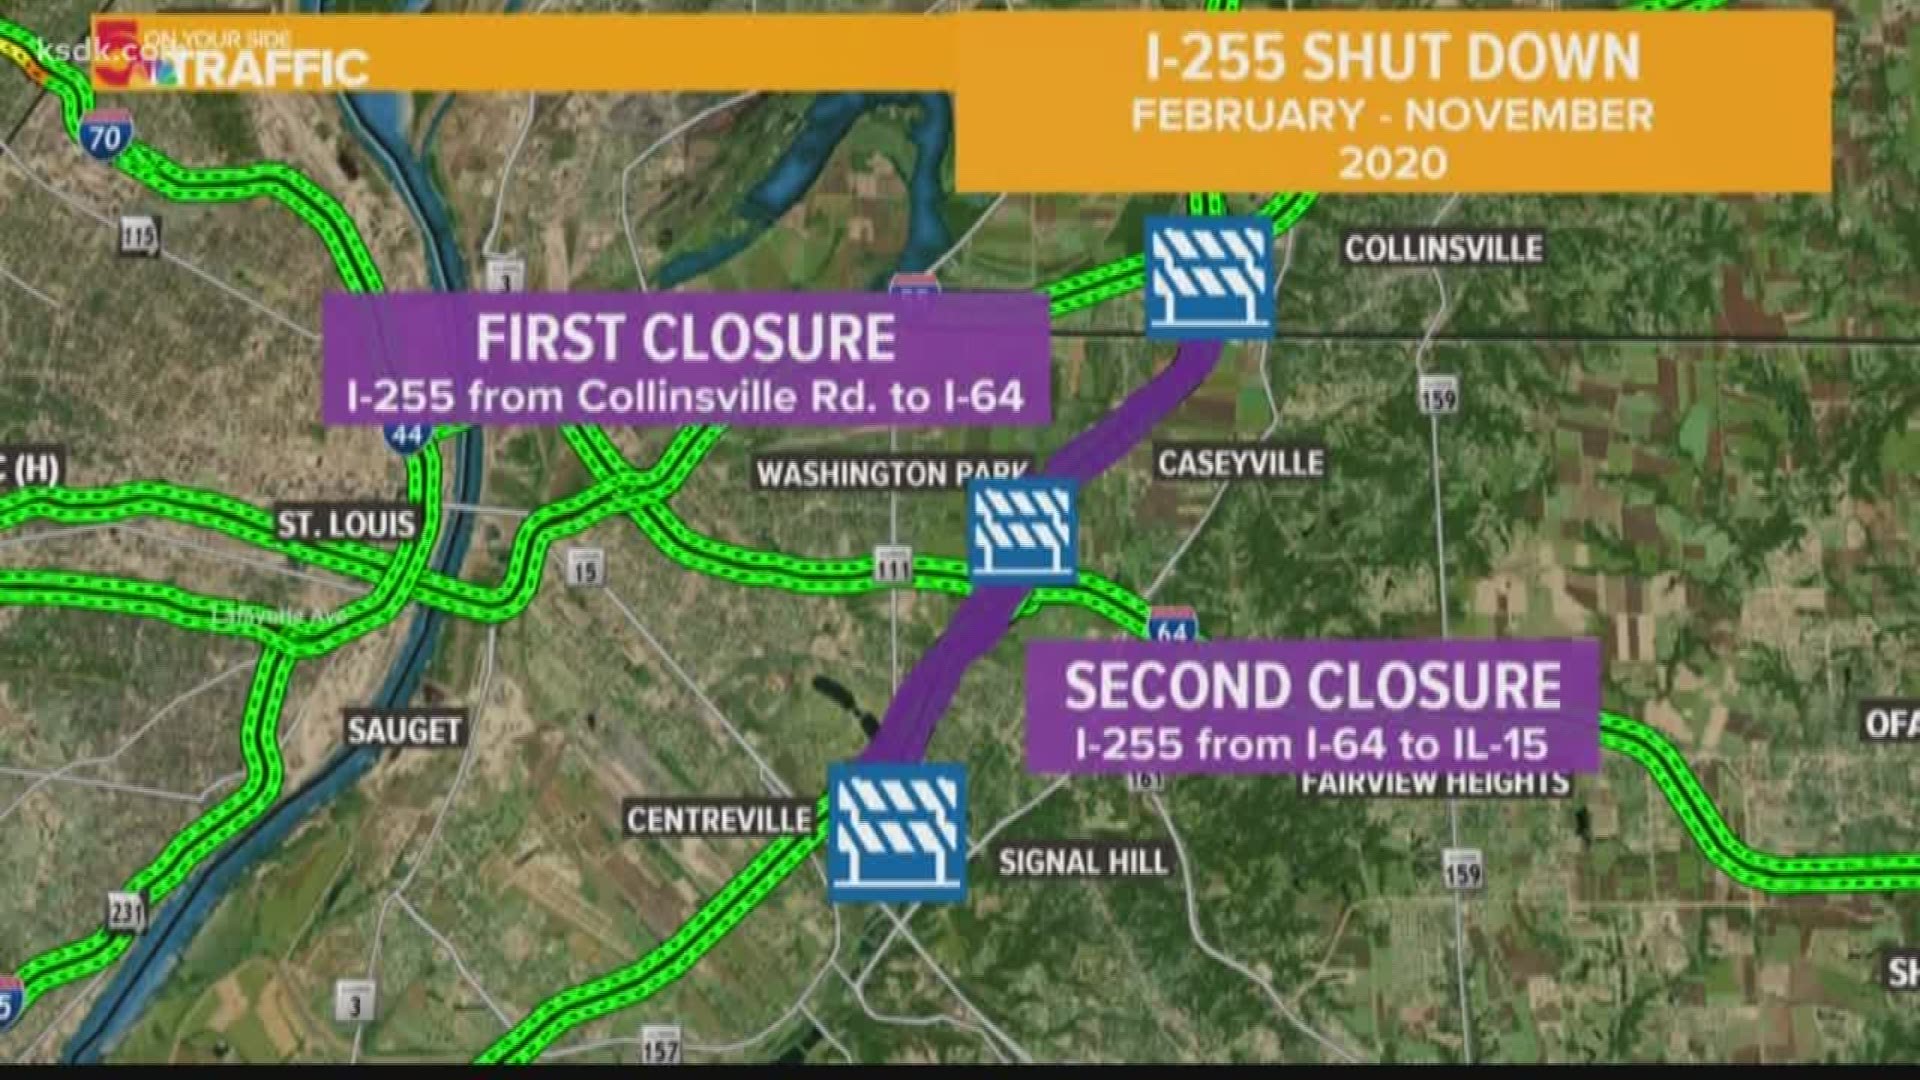 Metro East drivers, brace yourselves for a major traffic shake-up. Parts of Interstate 255 in Illinois will be shut down over the next several months.